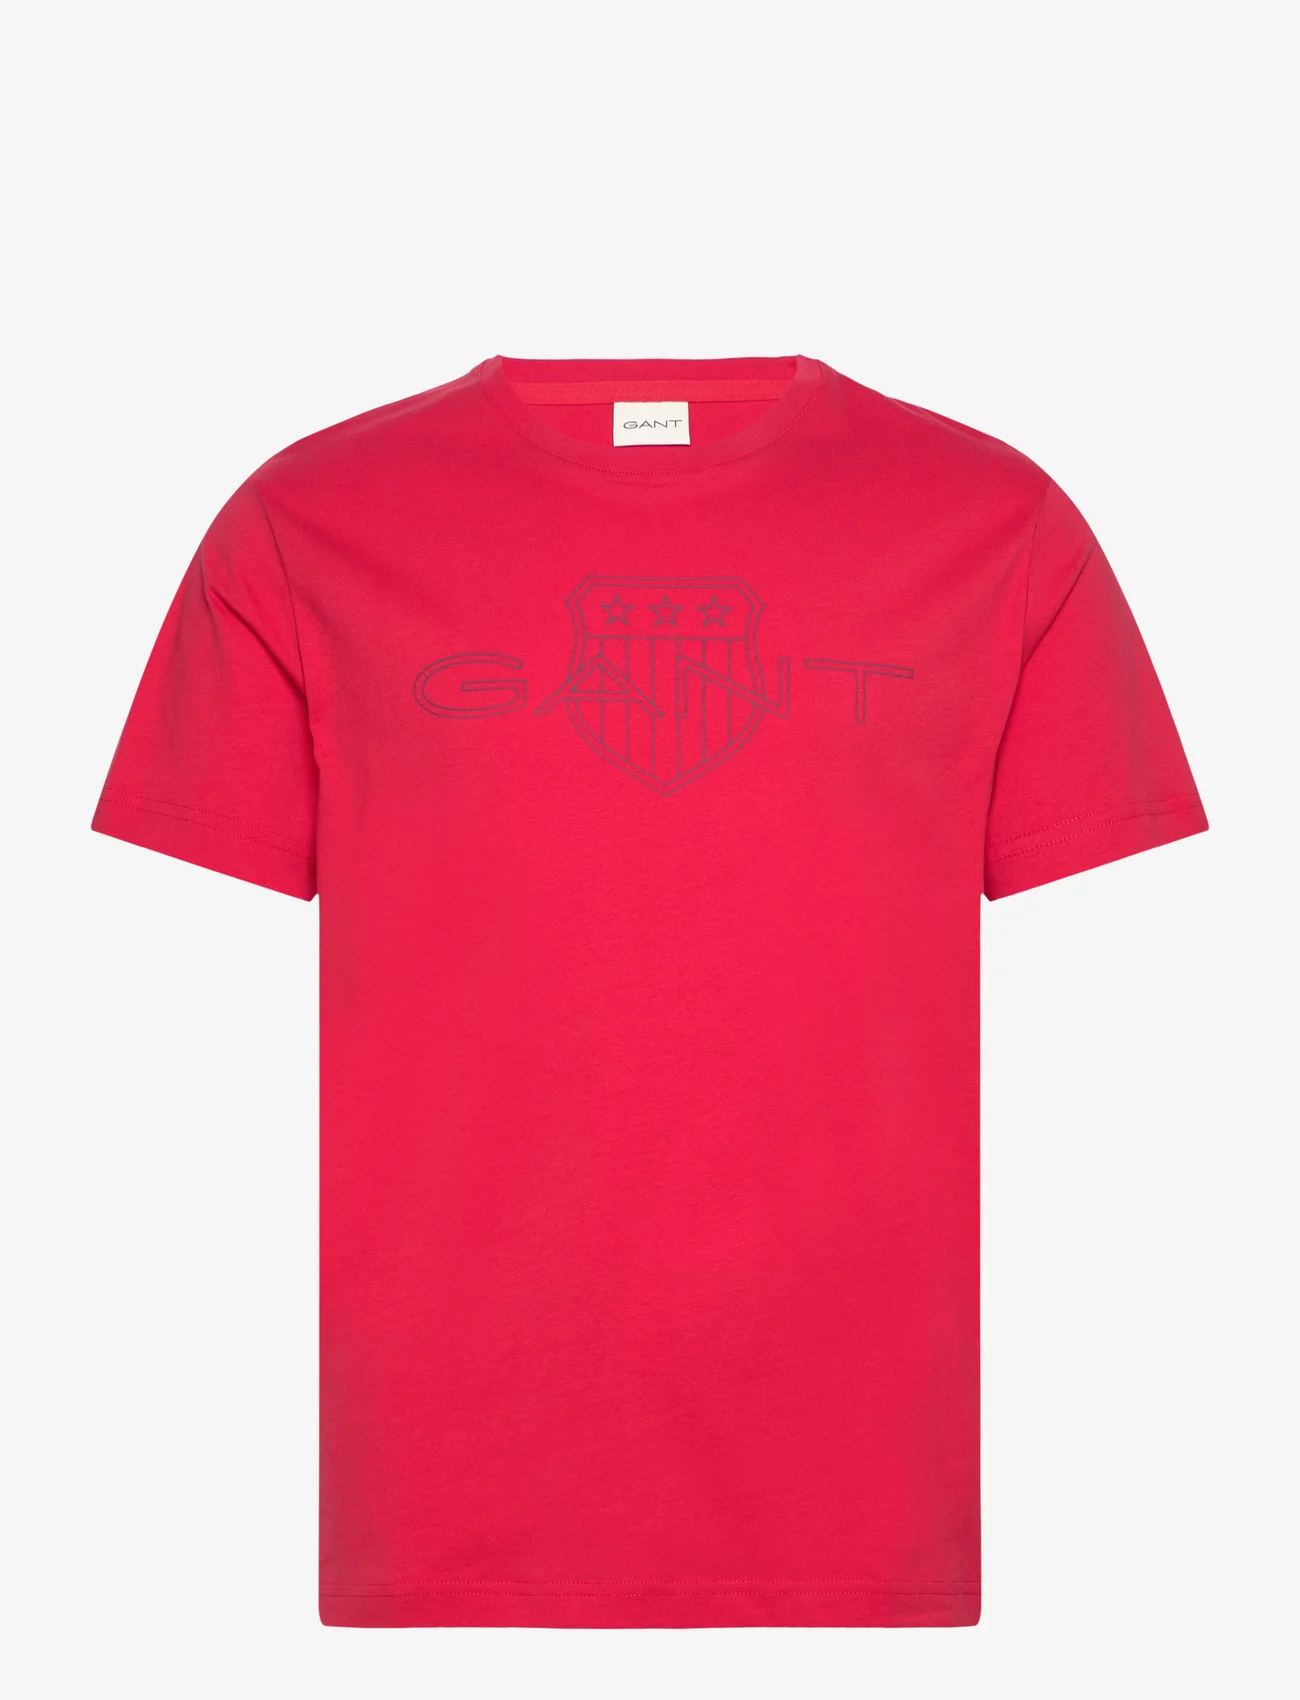 GANT - LOGO SS T-SHIRT - lowest prices - bright red - 0